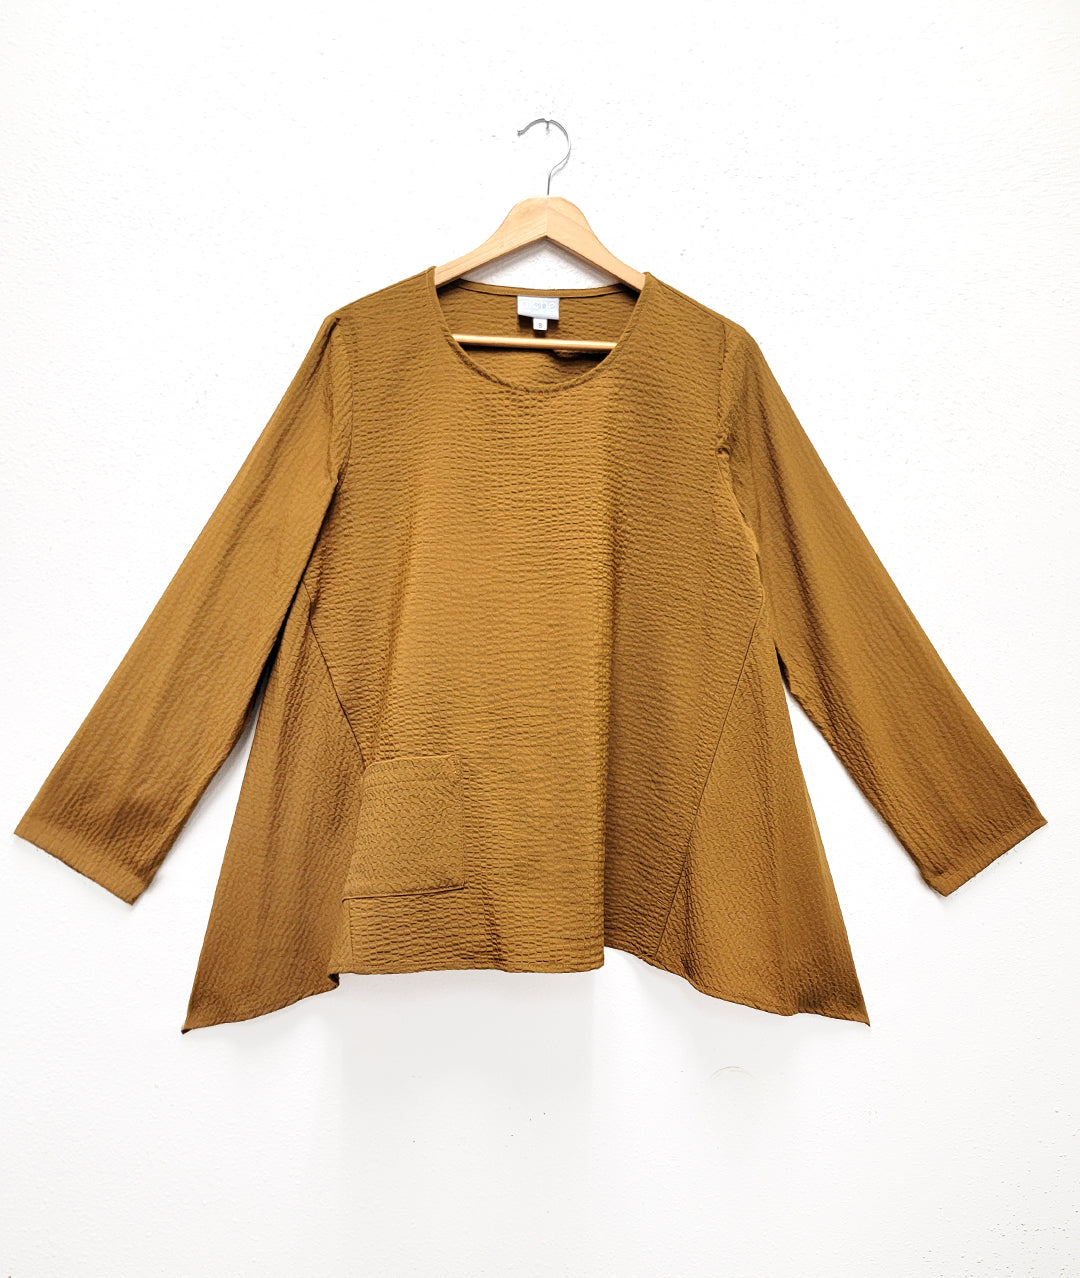 dijon yellow color pull over top with a single squared hip pocket, long sleeves and a hankerchief hemline